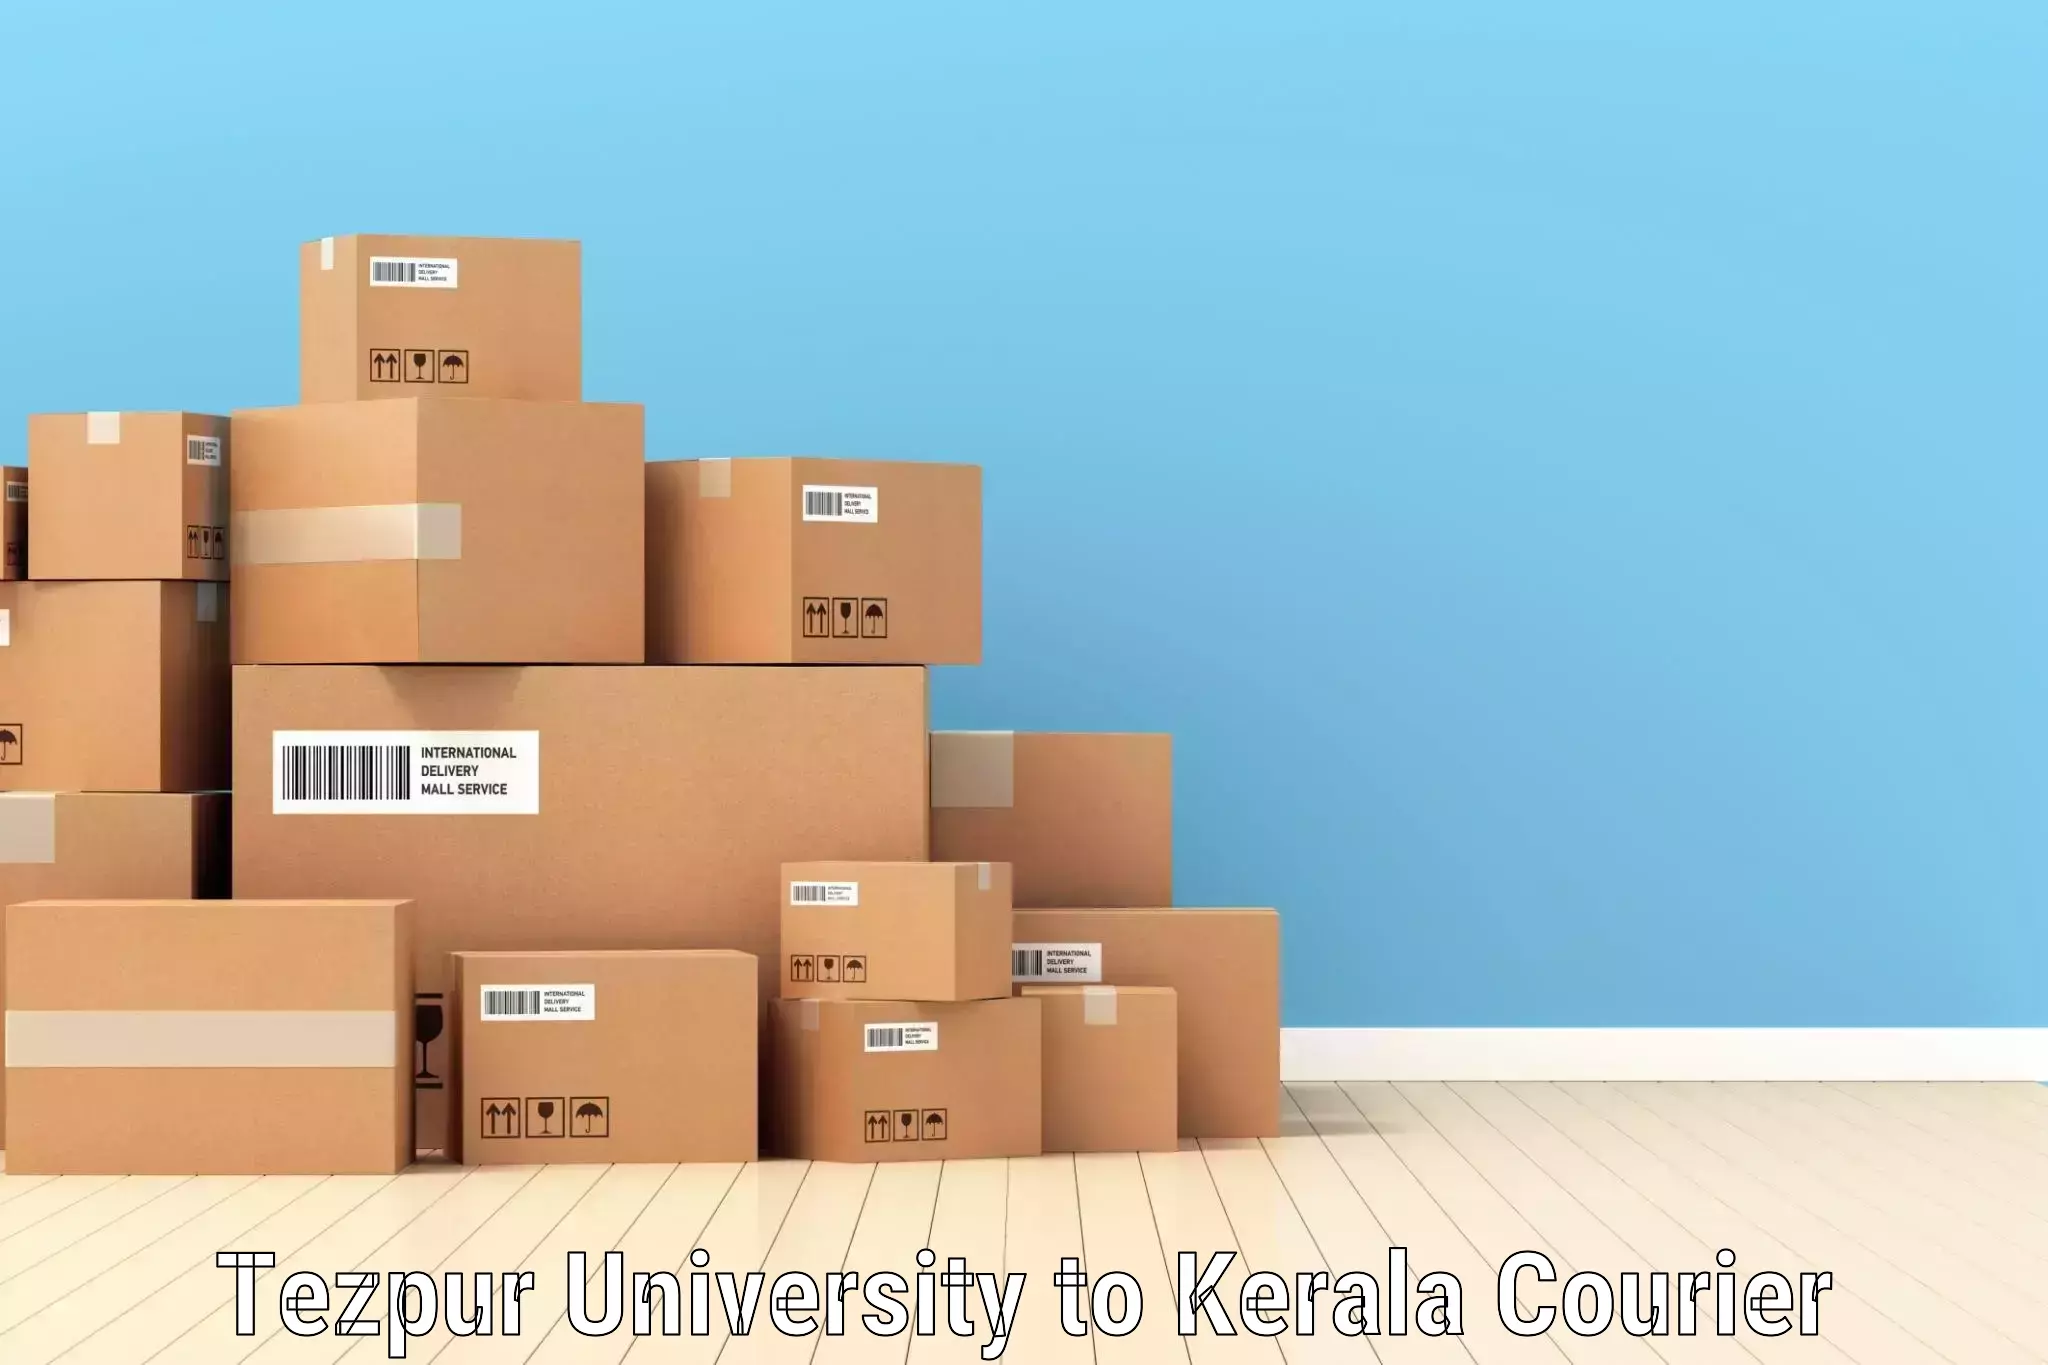 Express courier capabilities in Tezpur University to Palai